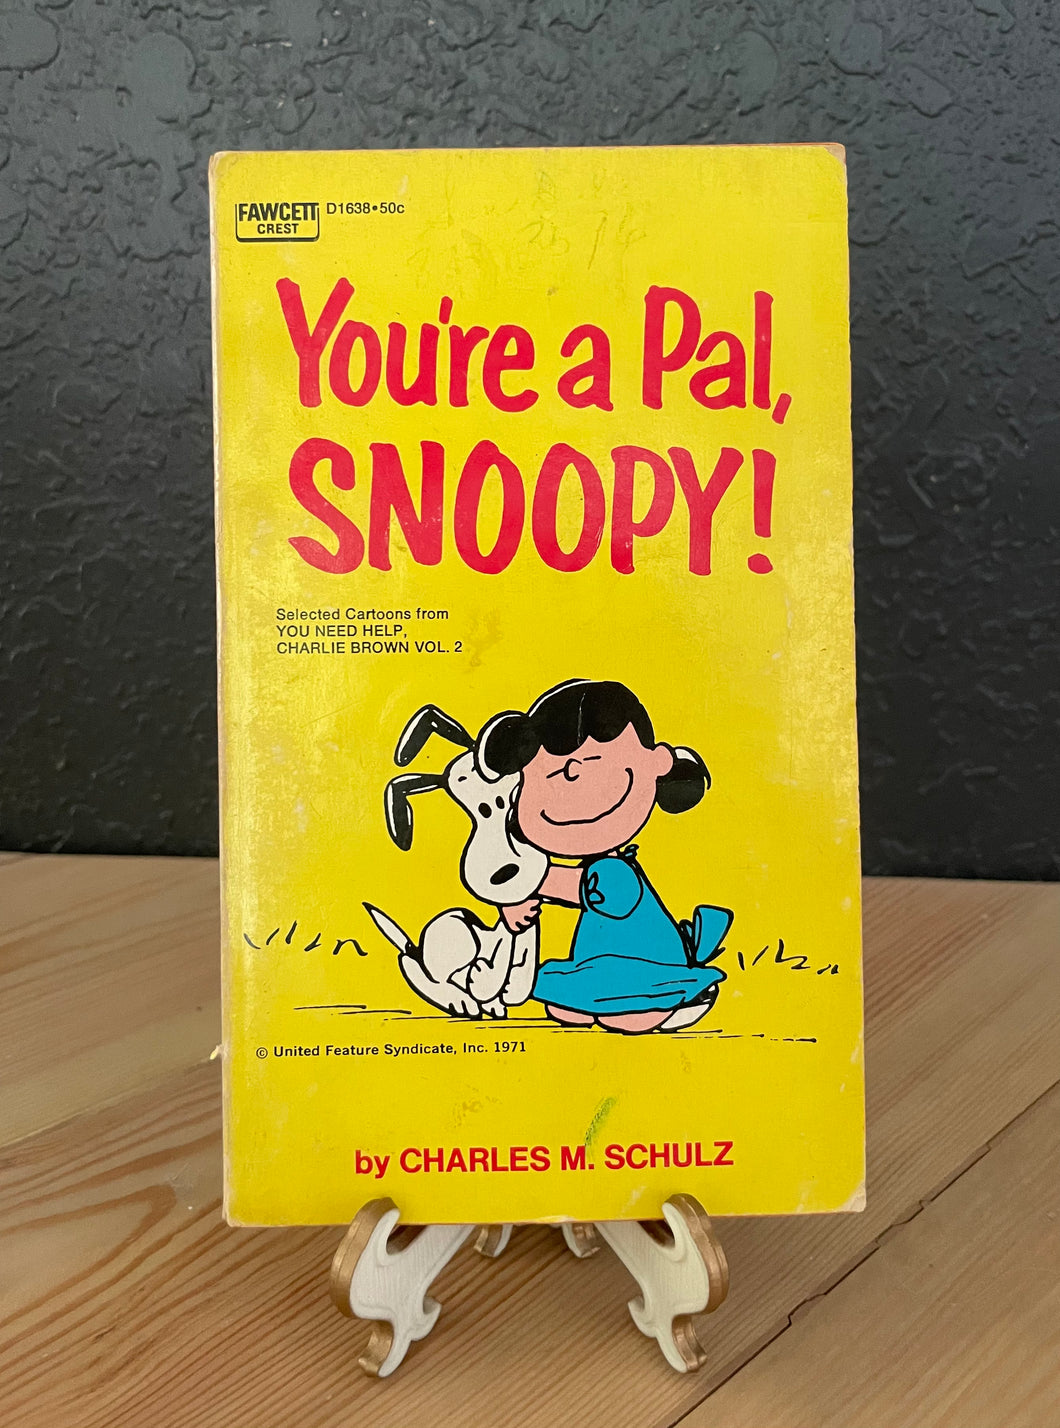 1972 “You’re a Pal, Snoopy” Vintage Paperback Book